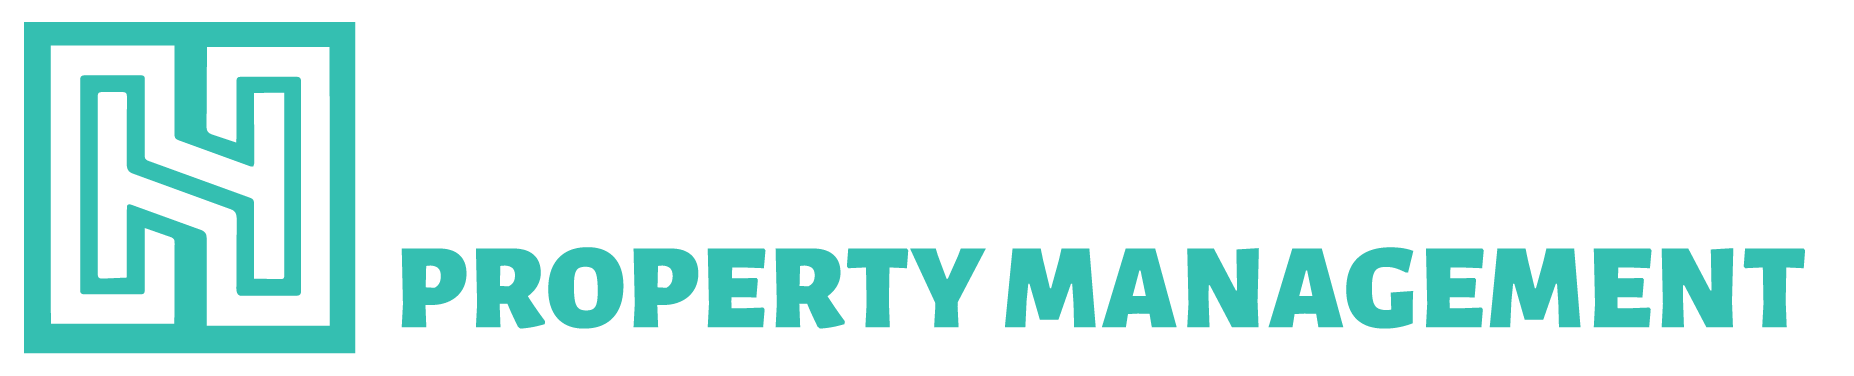 Headerwater Property Management Logo - linked to Home page